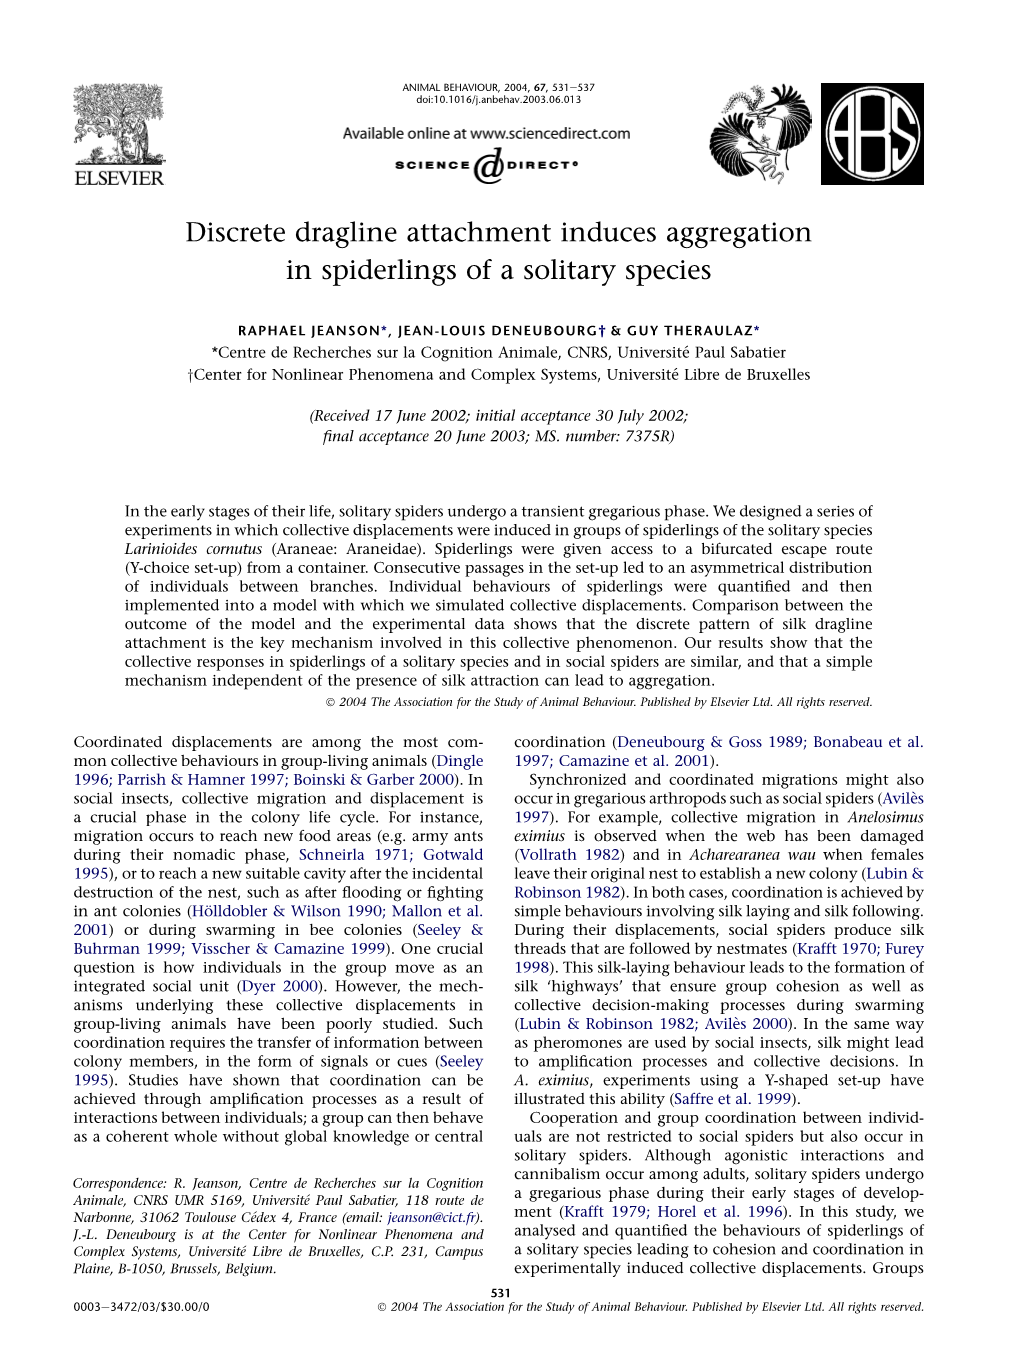 Discrete Dragline Attachment Induces Aggregation in Spiderlings of a Solitary Species